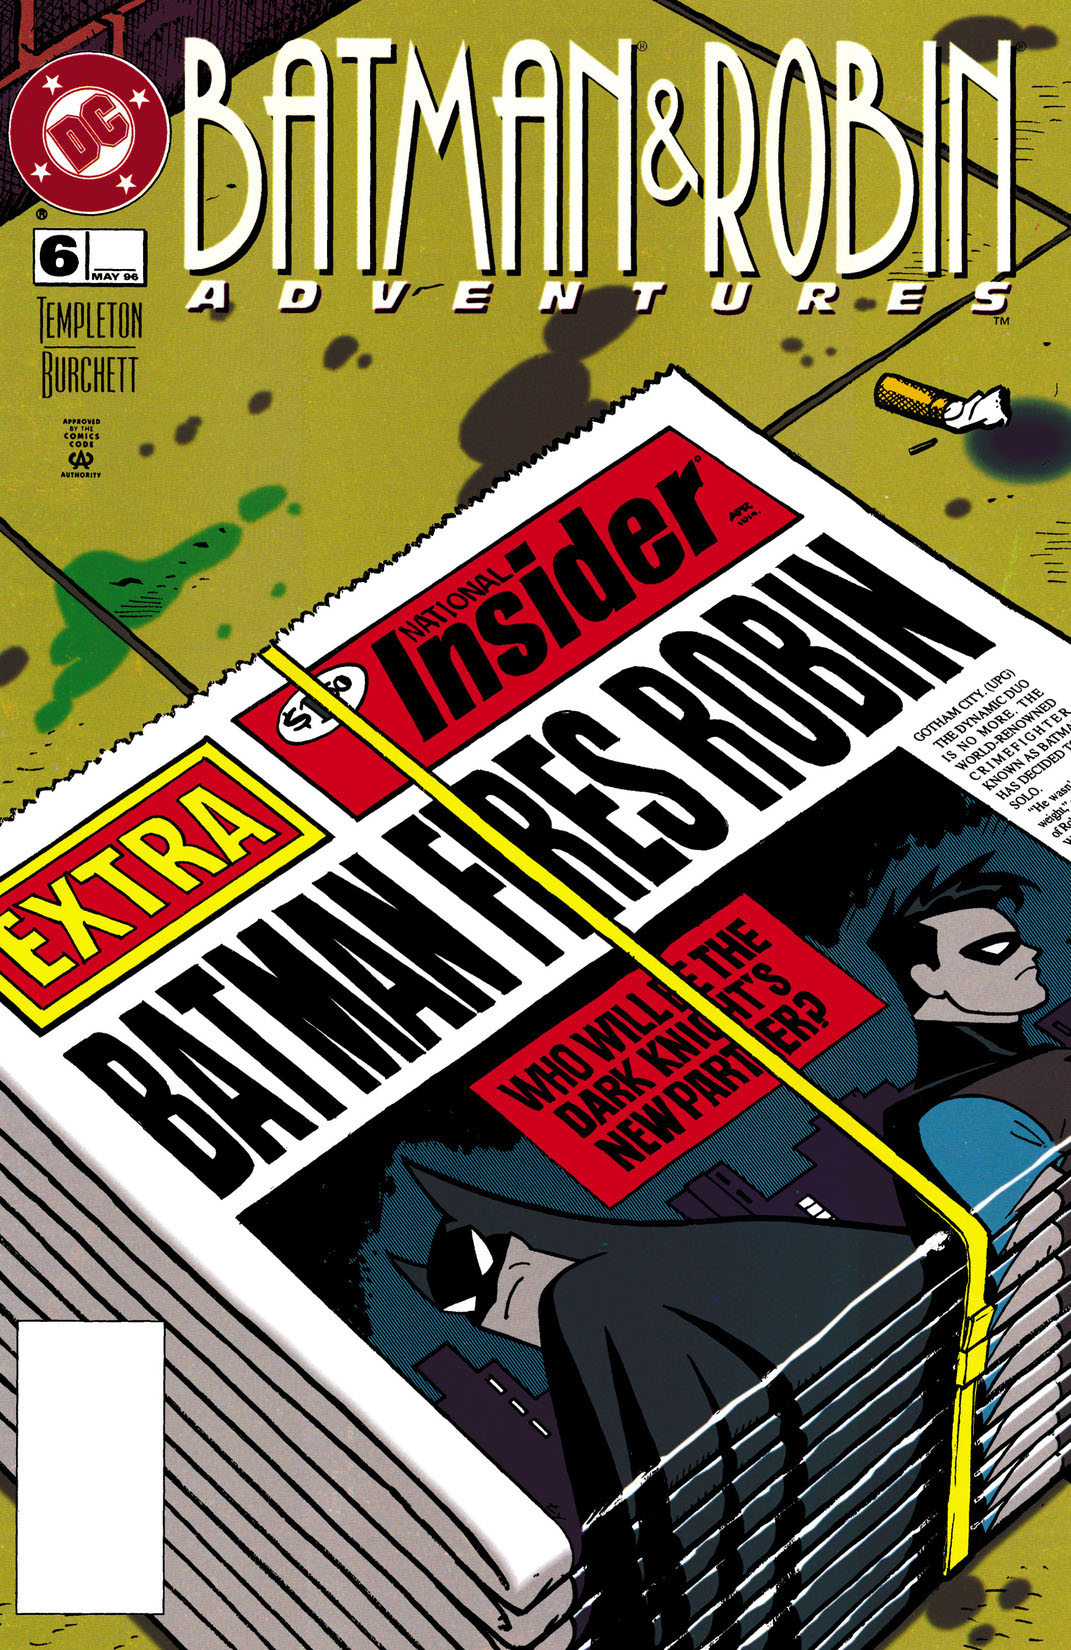 The Batman and Robin Adventures #6 preview images